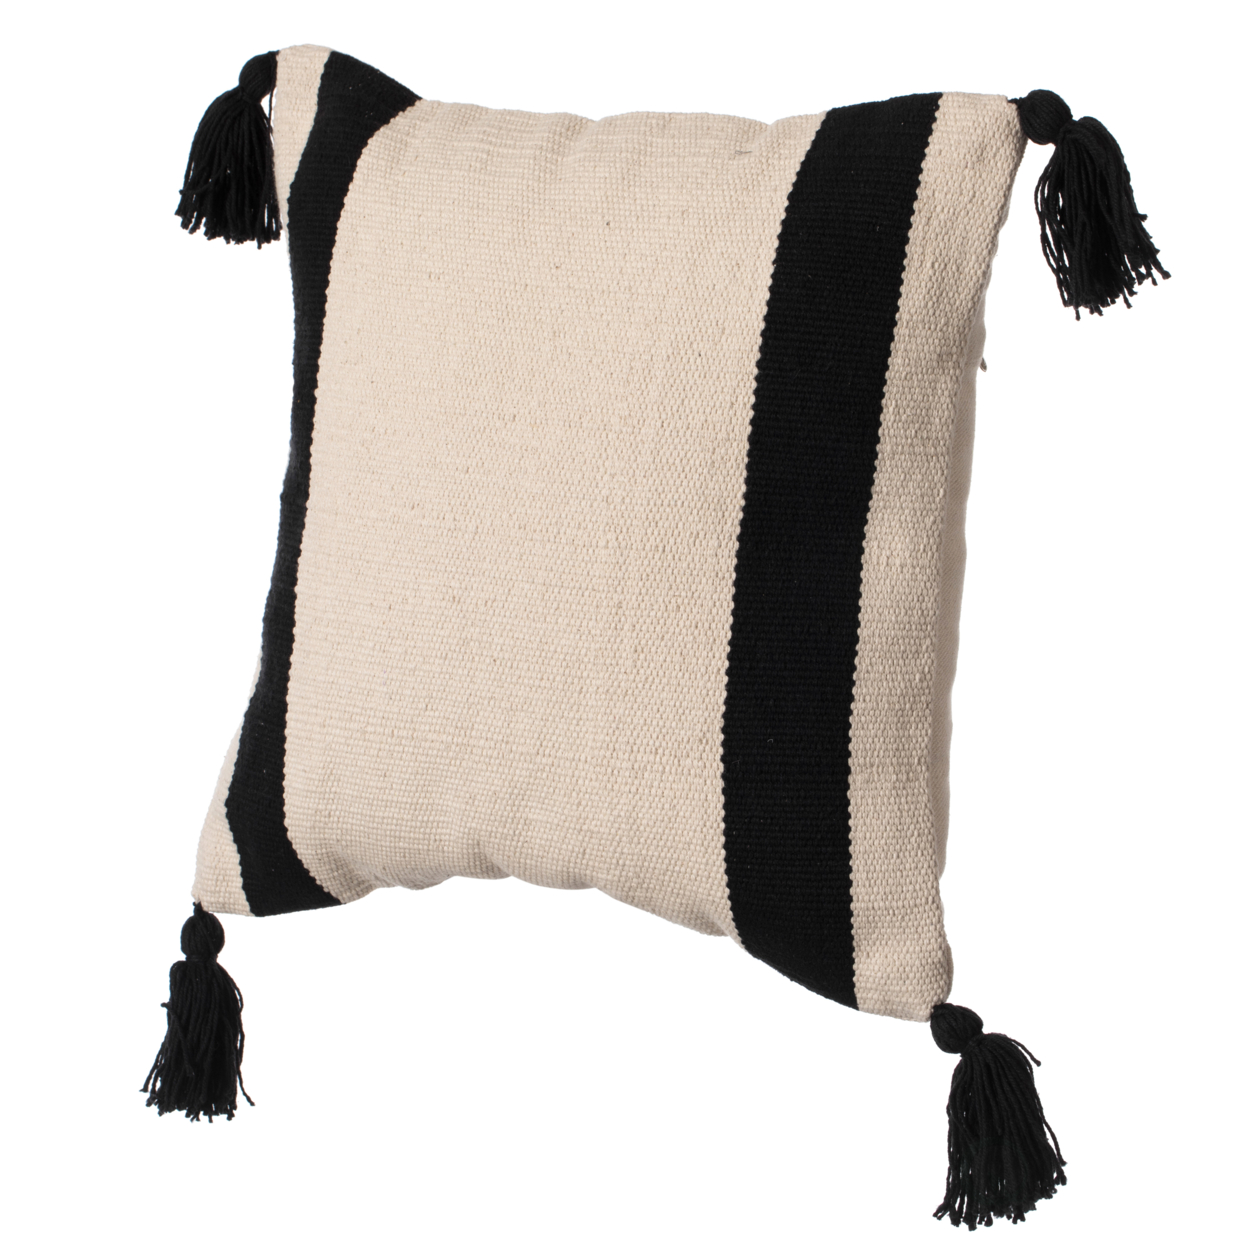 16" Handwoven Cotton Throw Pillow Cover with Side Stripes - black with cushion